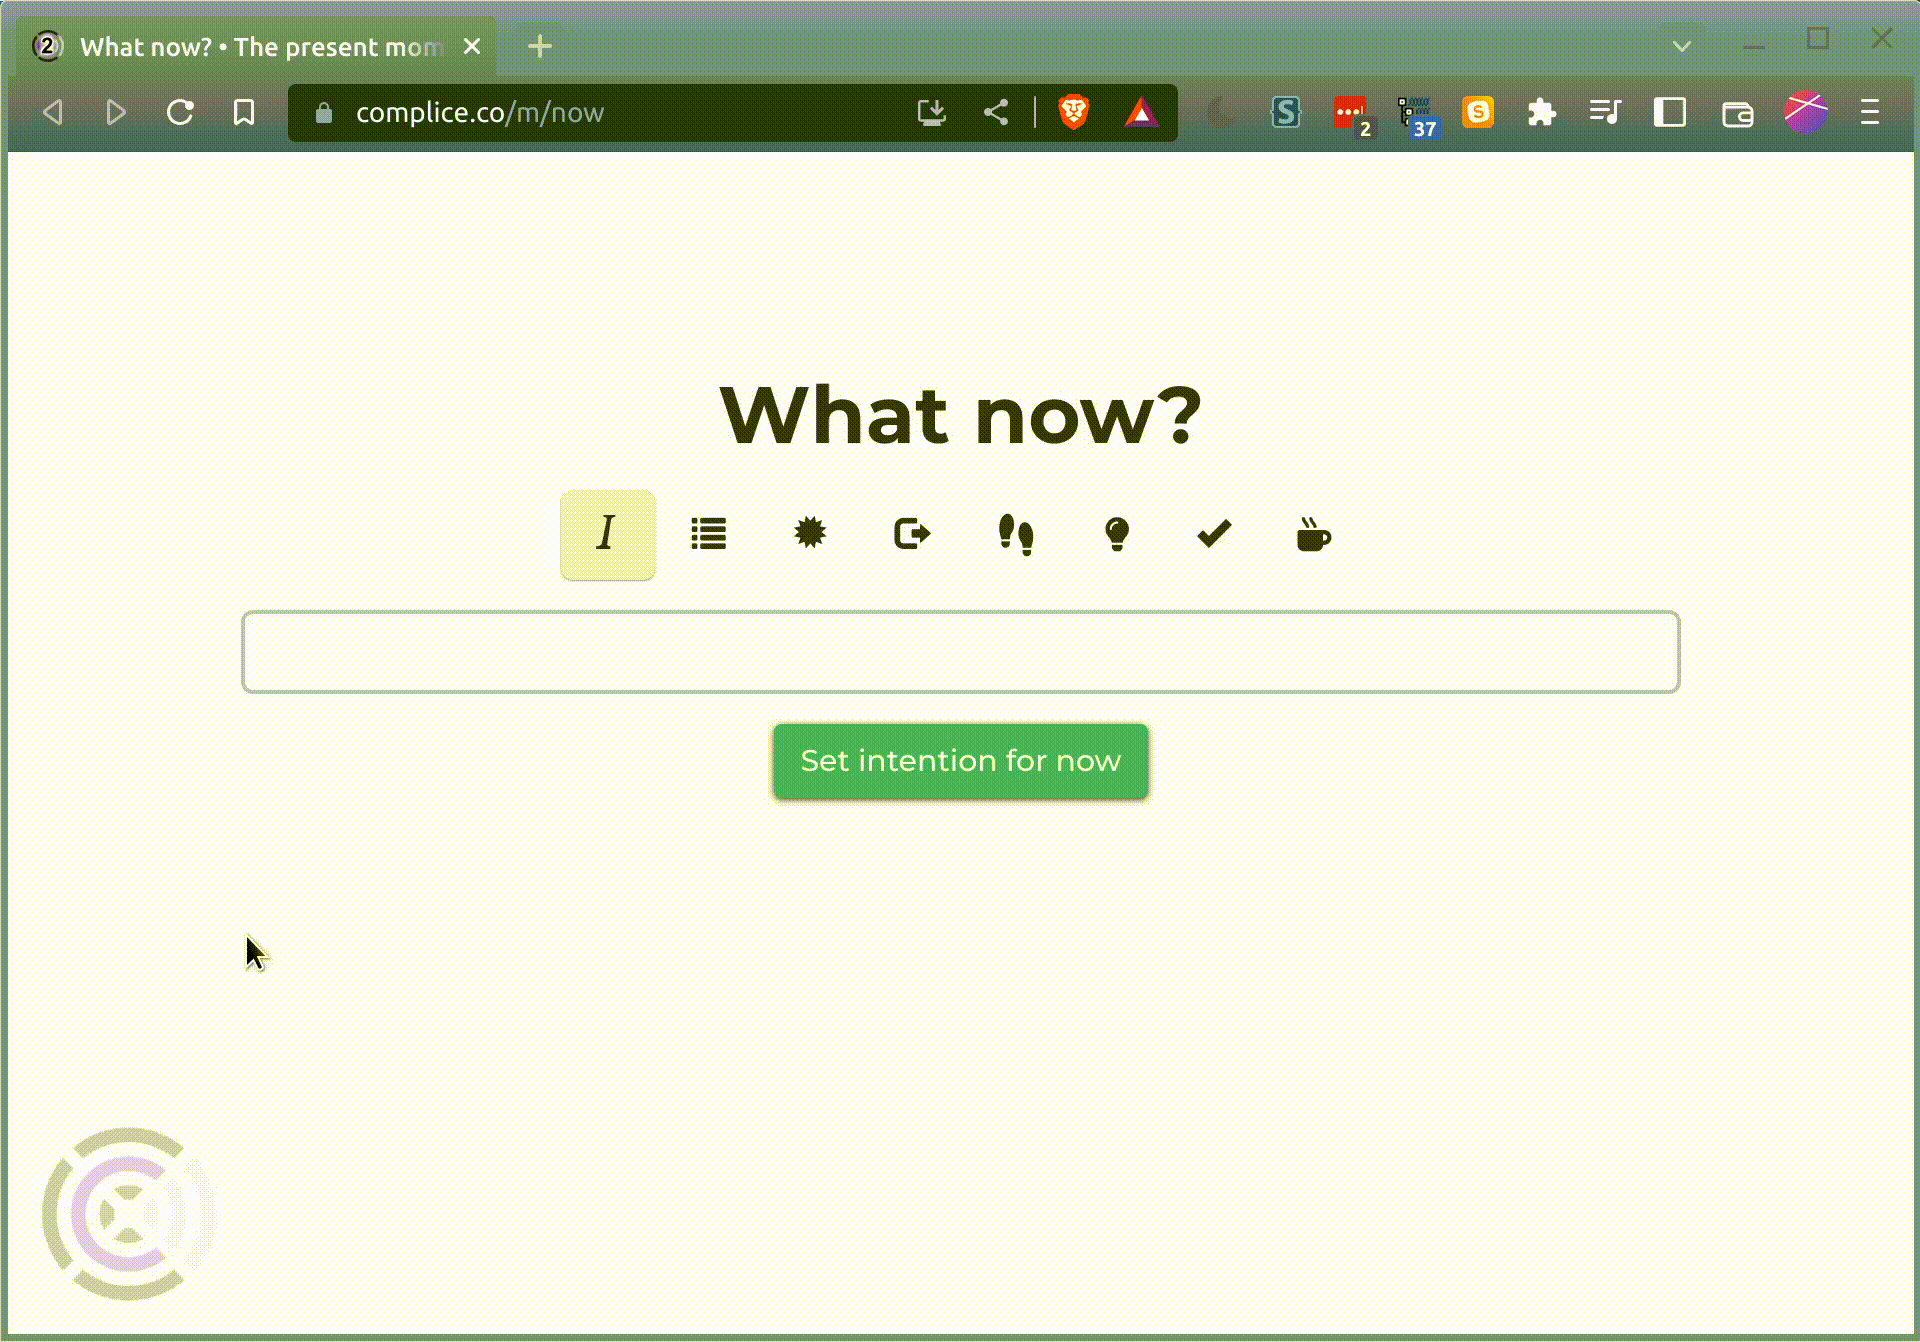 animated screencast of the now page